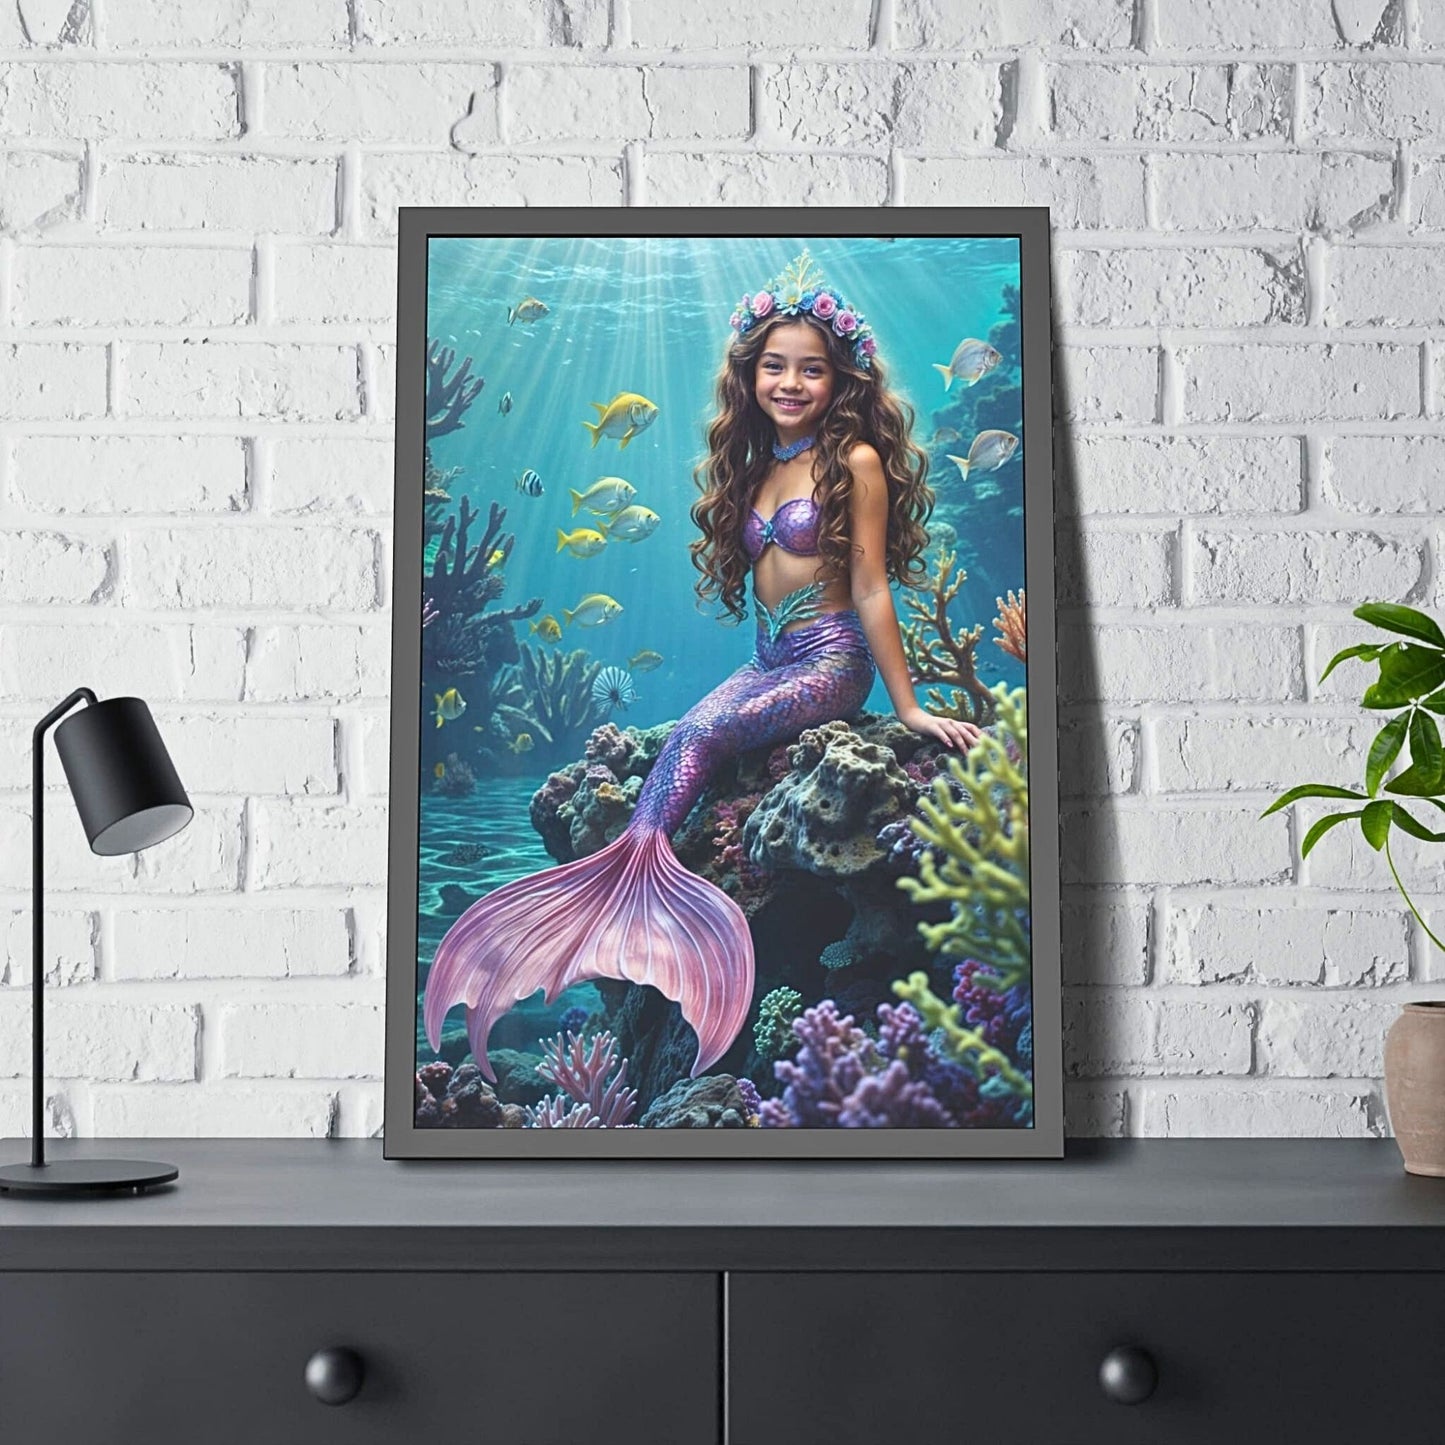 Surprise your daughter with a magical Custom Mermaid Portrait from Photo, perfect for her Birthday. This Personalized Princess Mermaid Portrait transforms her photo into beautiful Wall Art. Ideal for daughters, sisters, moms, and girlfriends, these Custom Mermaid Art portraits make unique gifts that turn cherished photos into enchanting keepsakes for any special occasion.